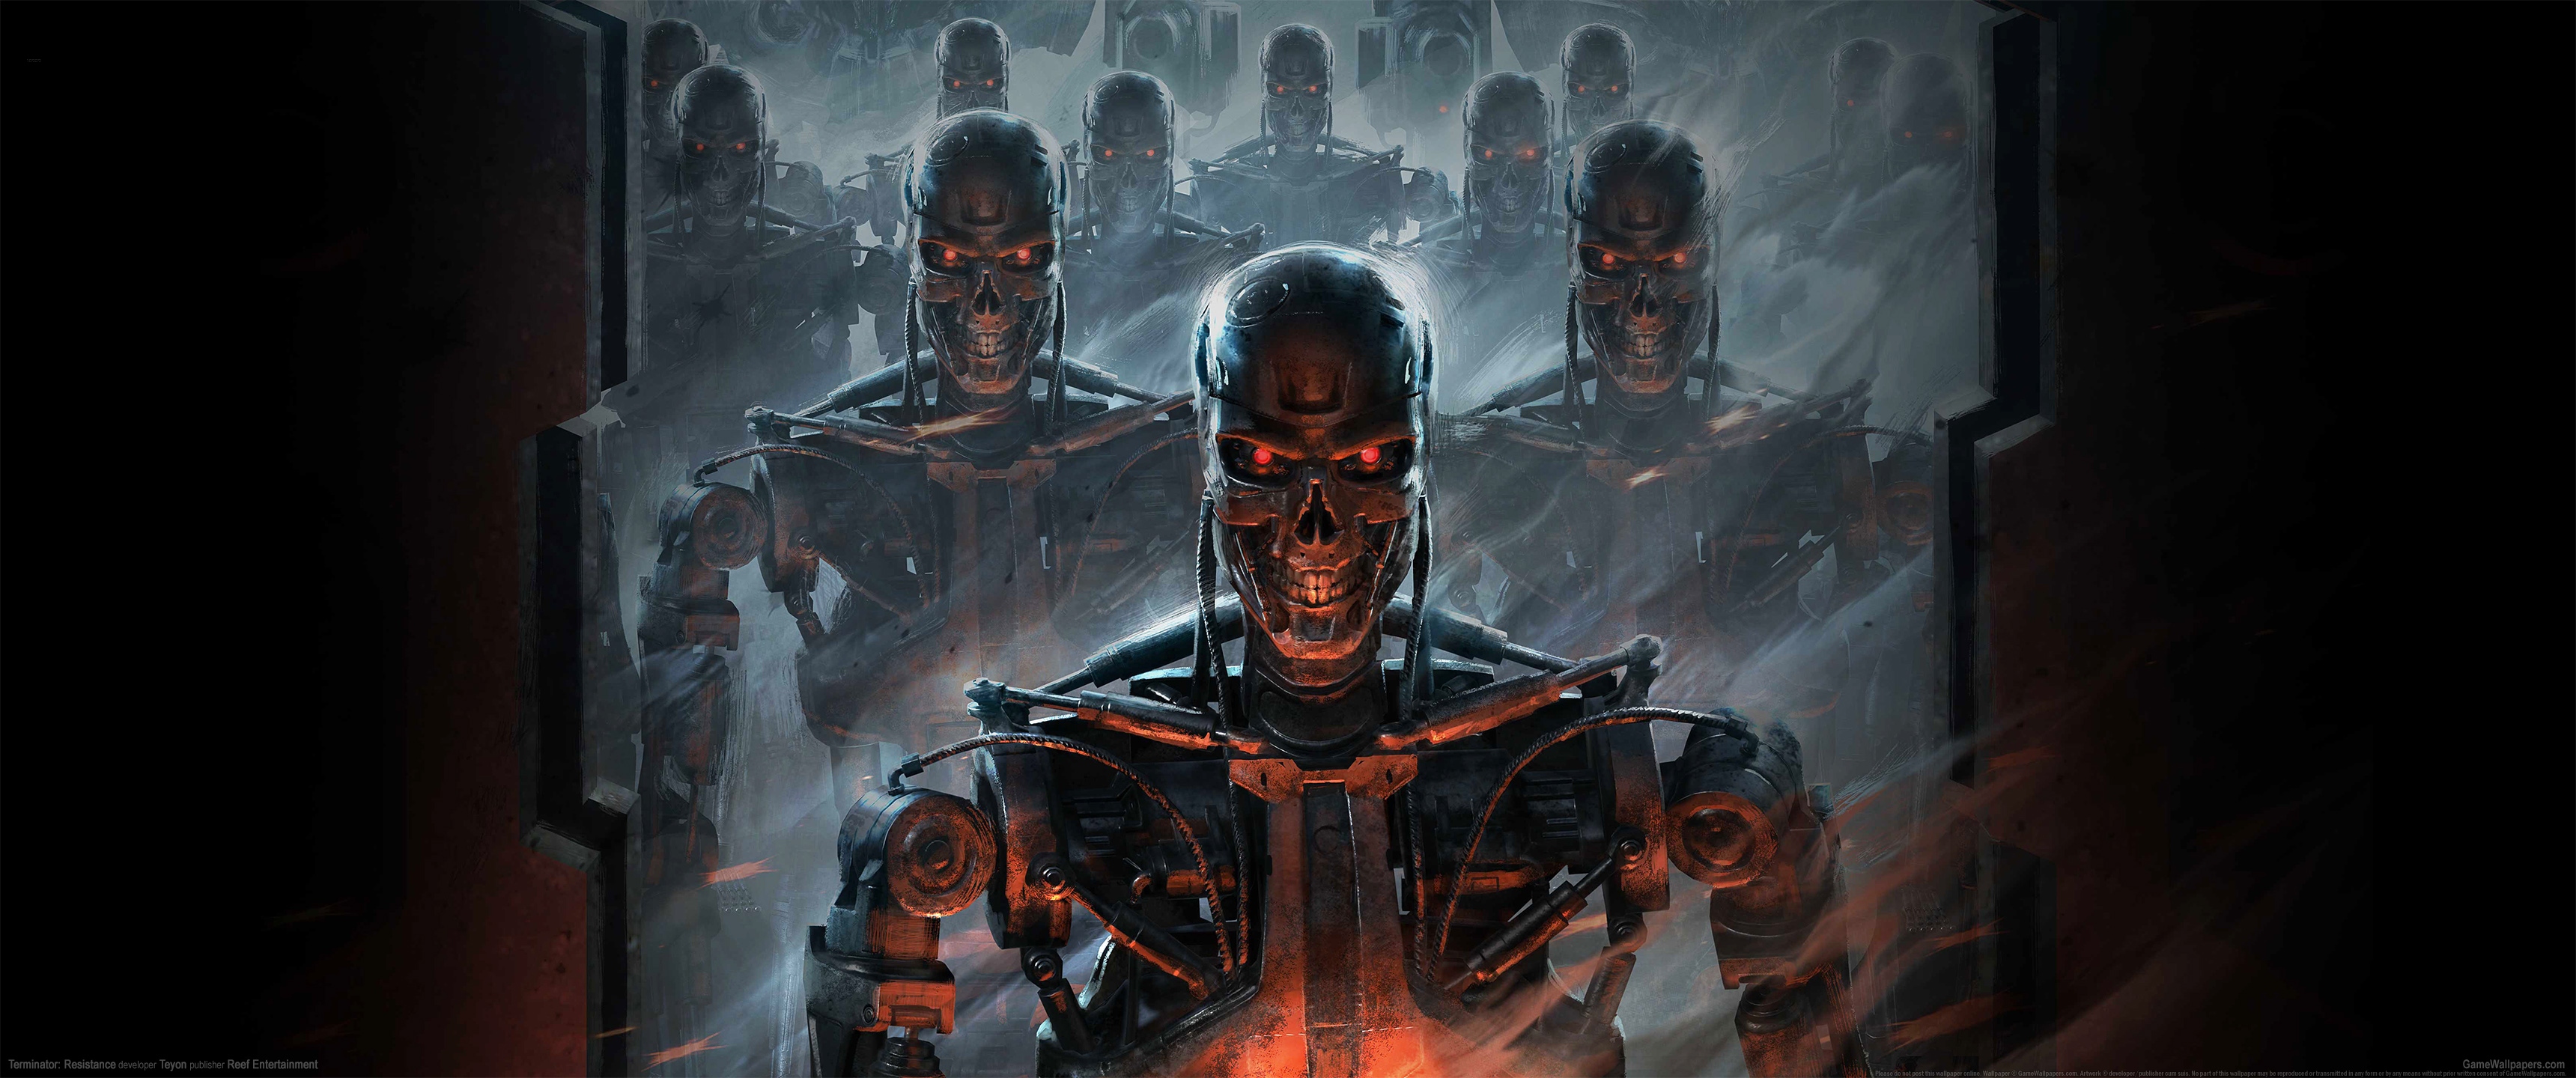 Terminator: Resistance 3440x1440 wallpaper or background 01